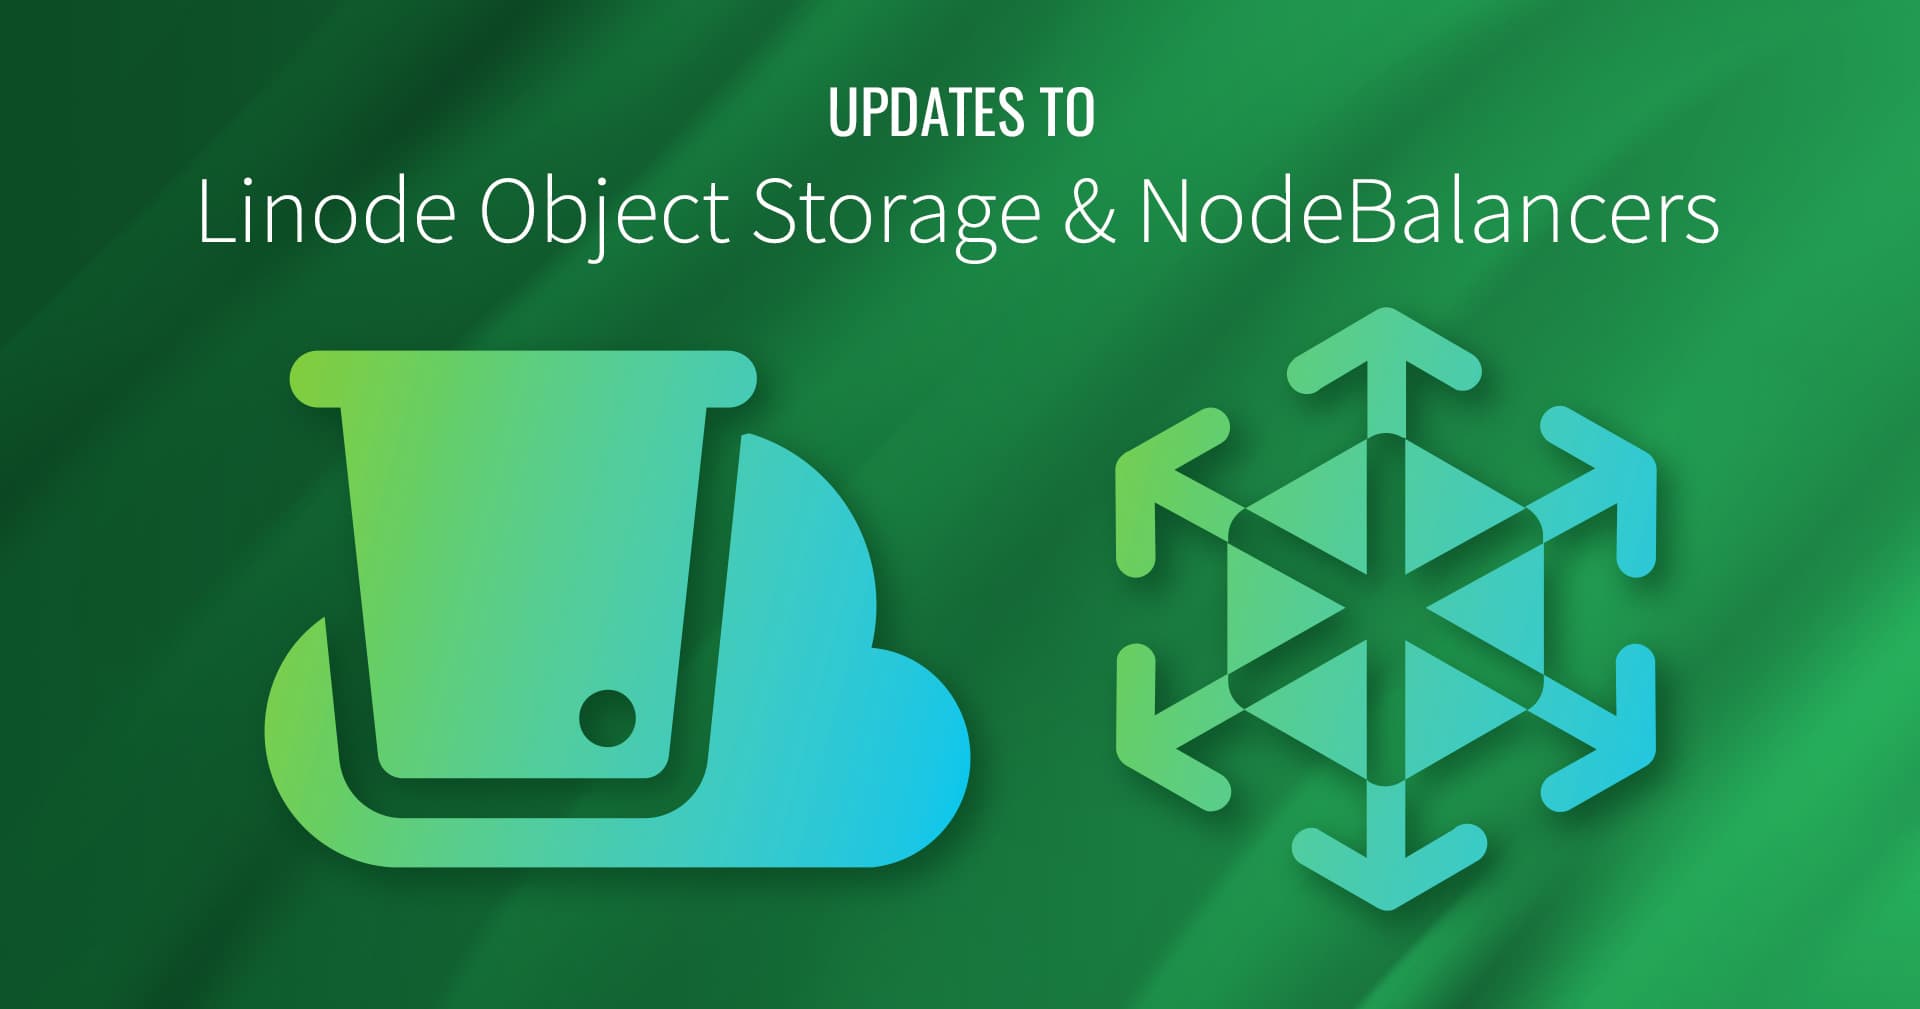 Bring Your Own SSL on Linode Object Storage and Proxy Protocol on NodeBalancers